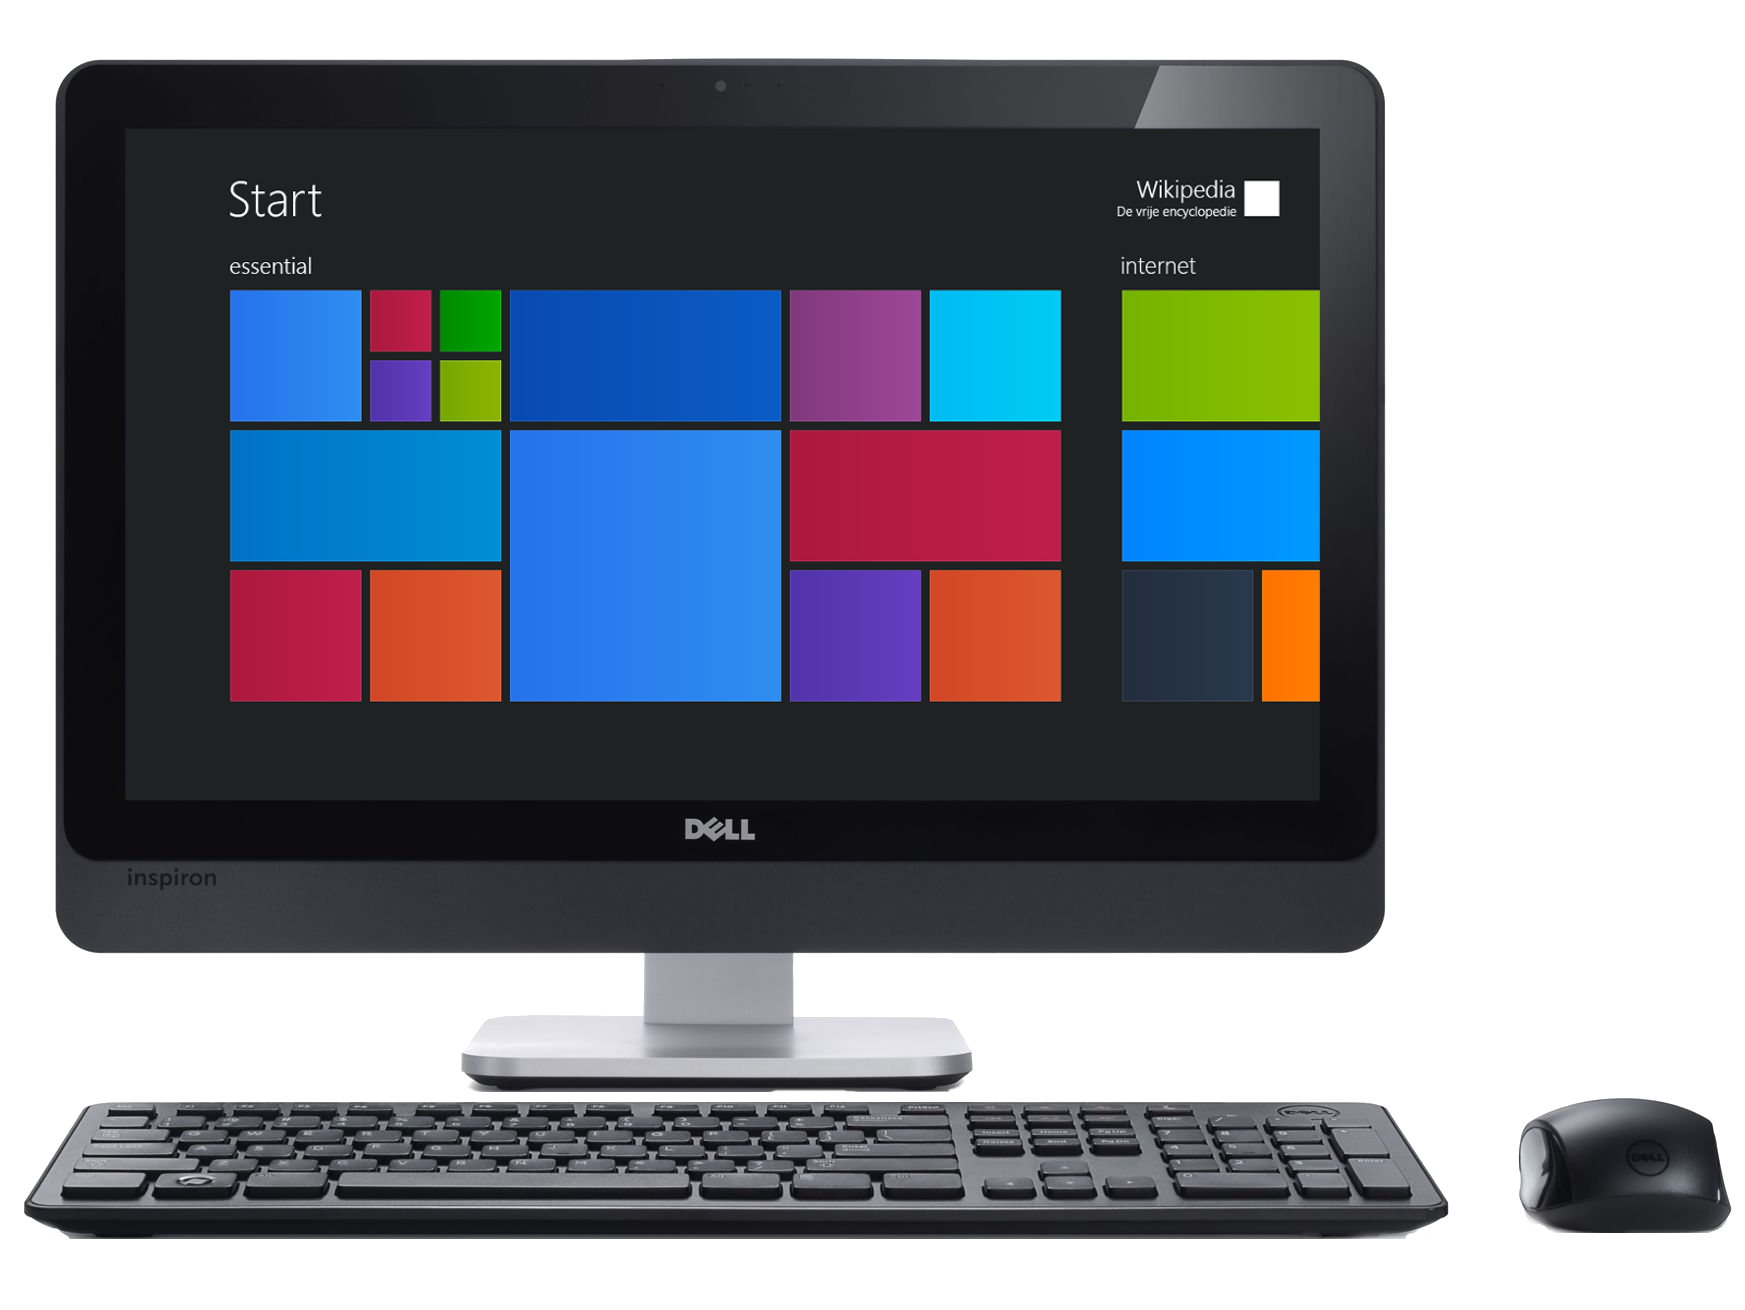 Dell_Inspiron_One_23_Touch_AIO_Desktop_PC